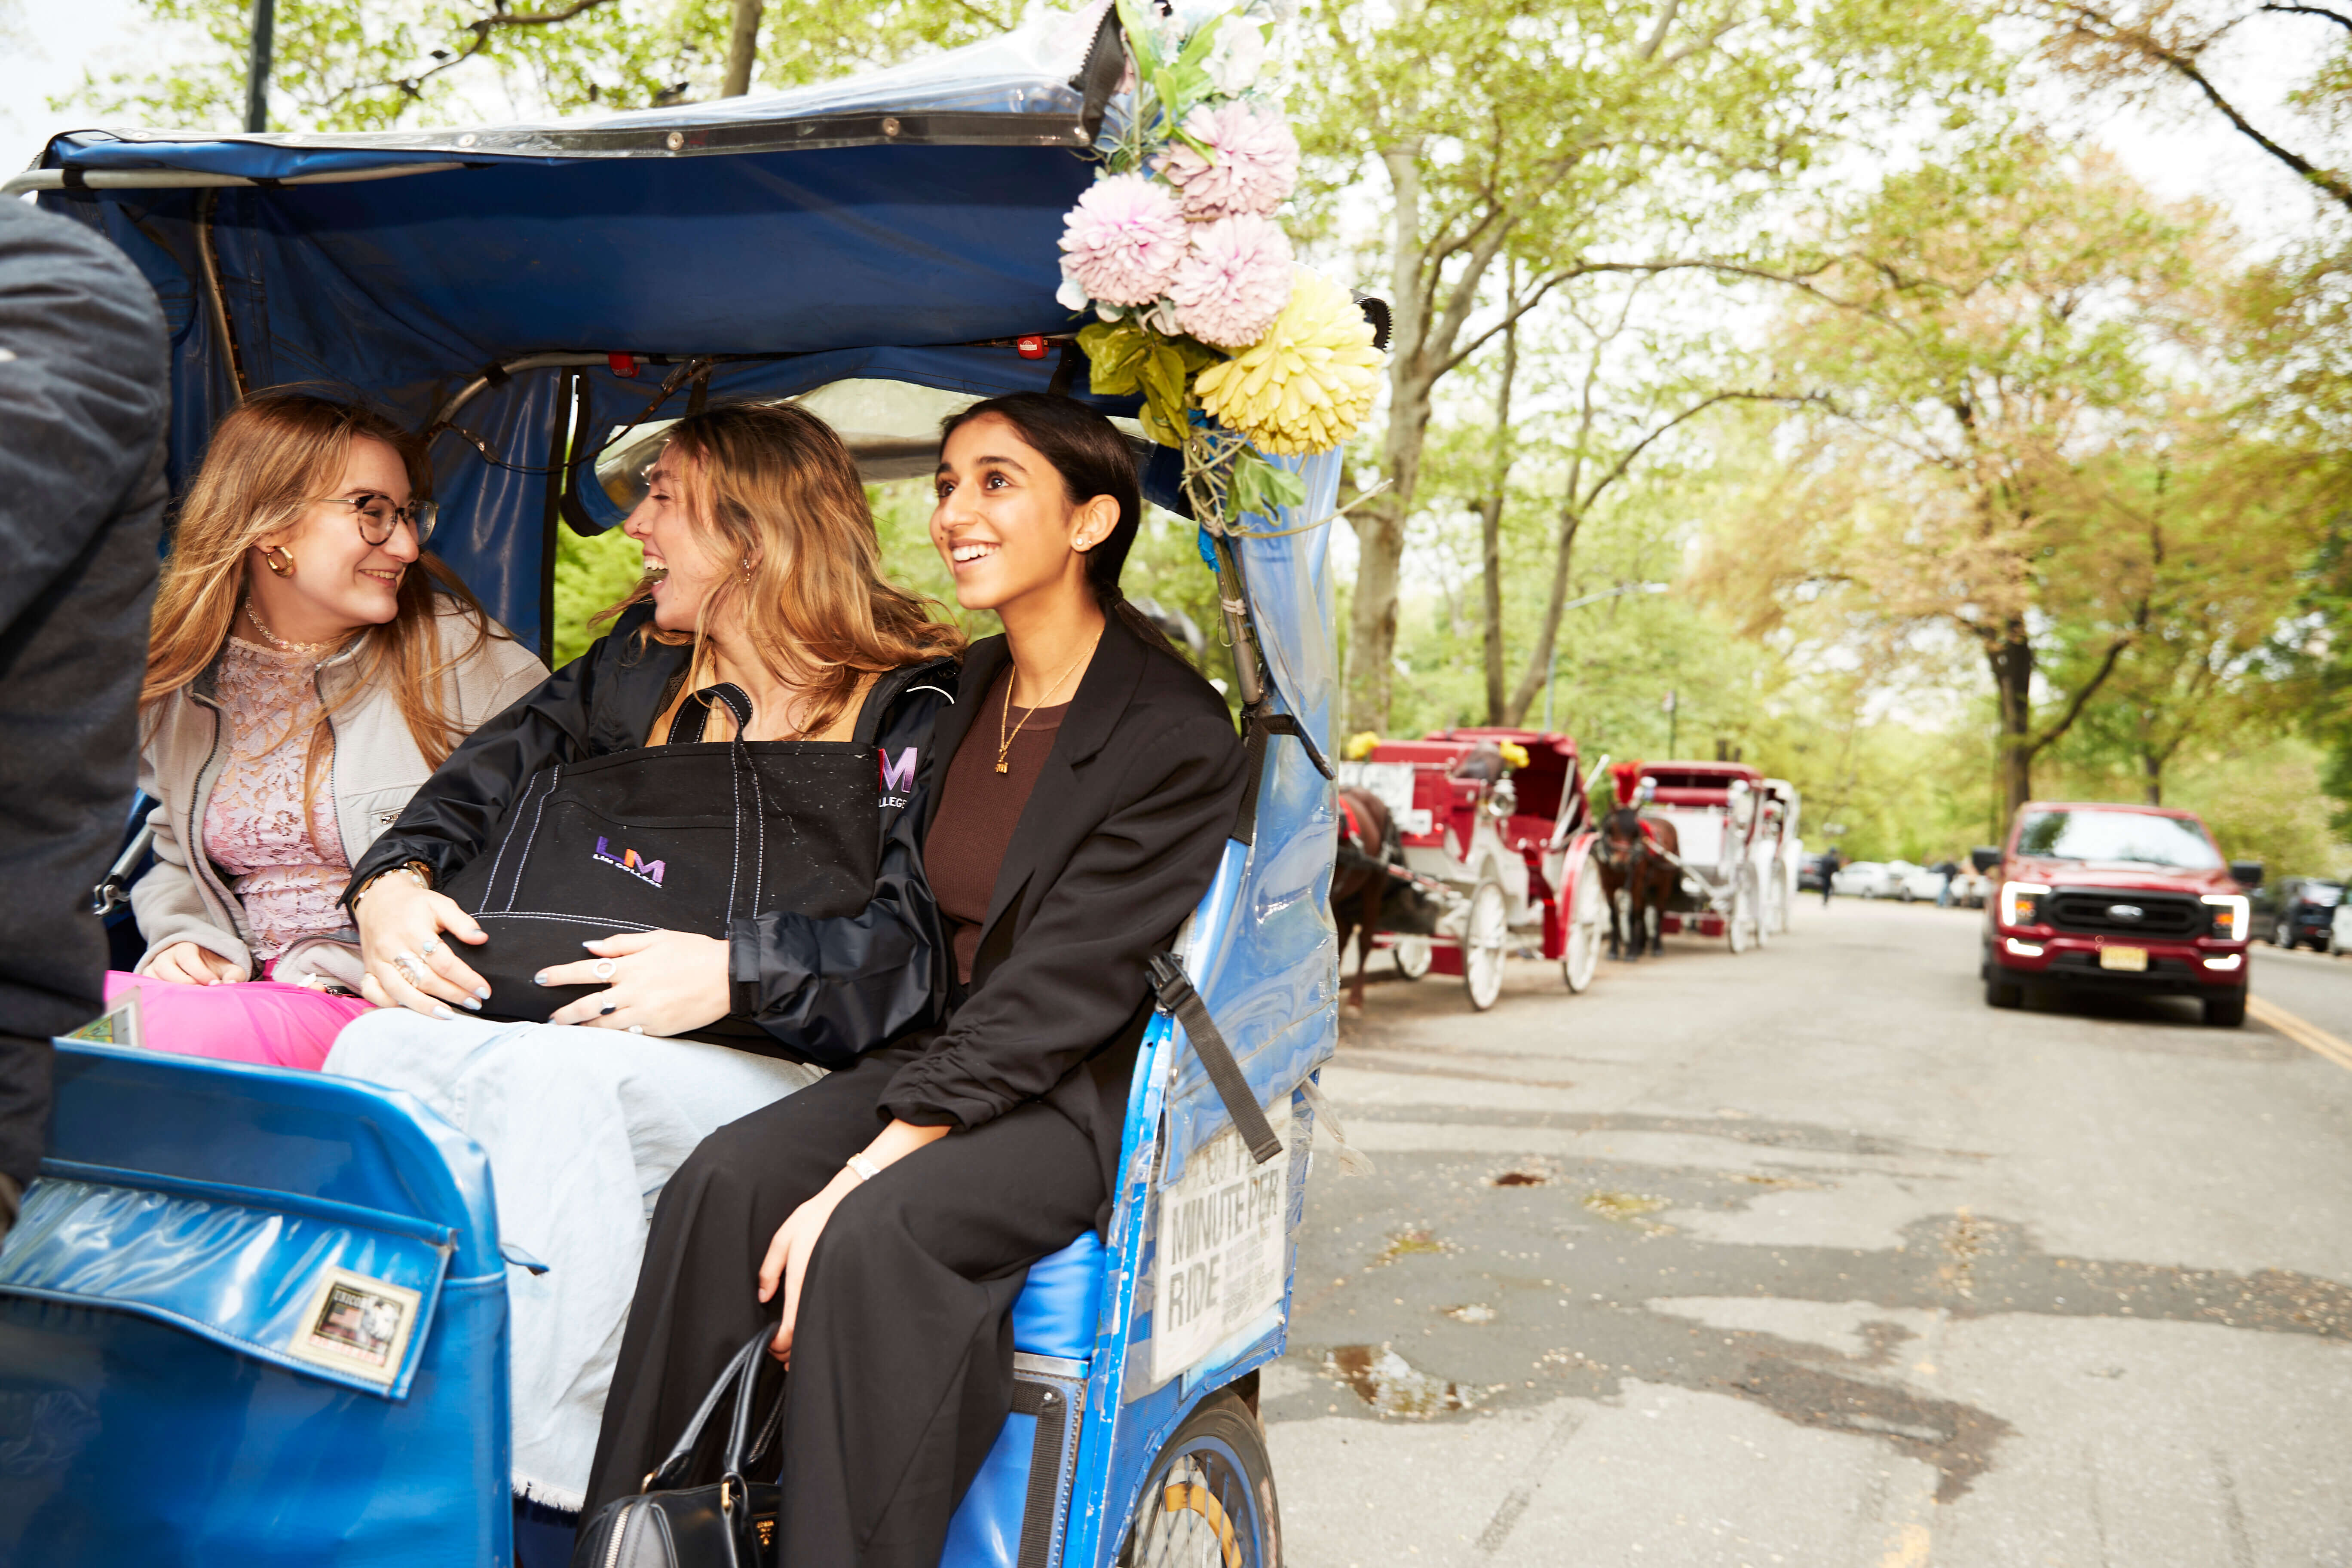 three female students in a carriage ride in Central Park